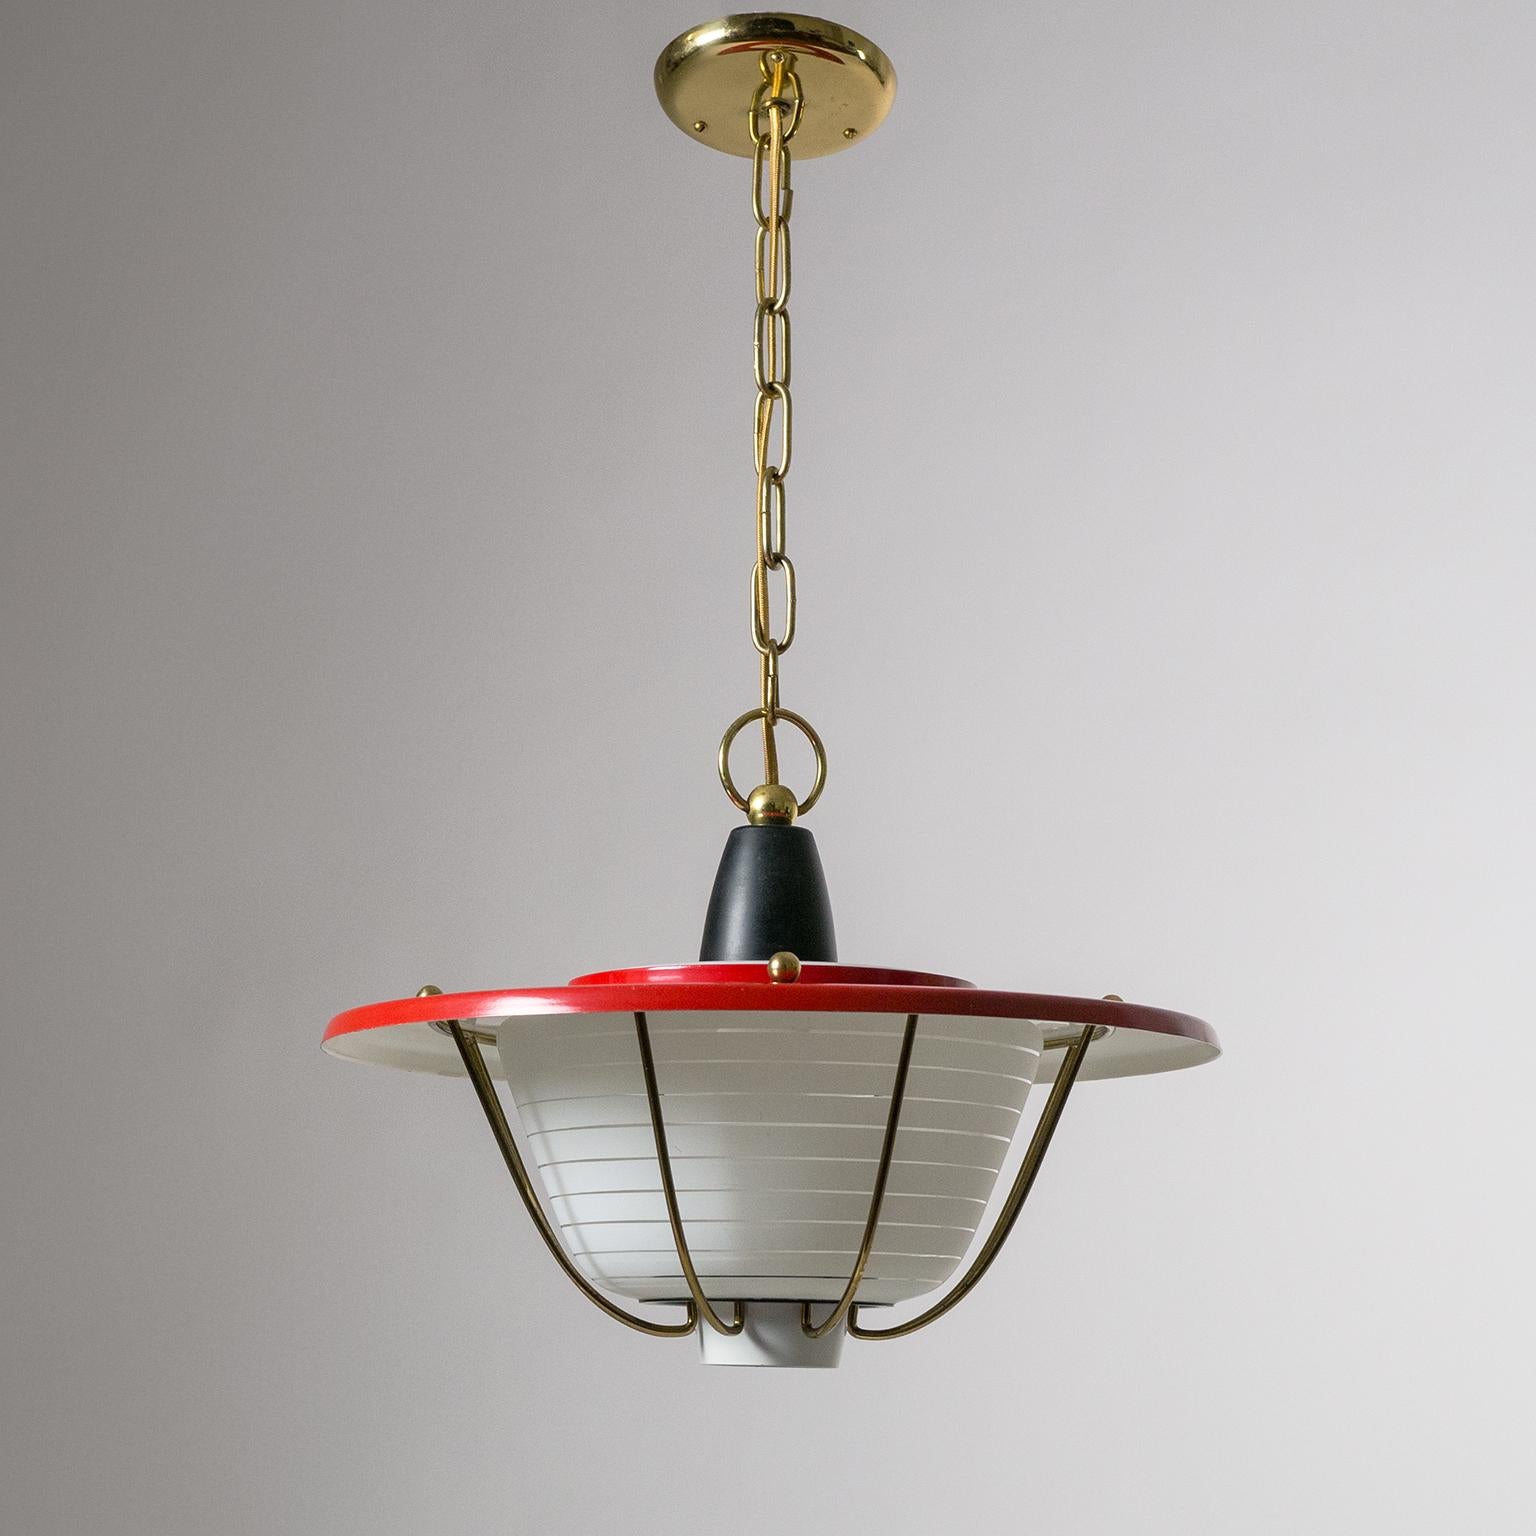 Charming French midcentury lantern with a striped glass diffuser, red lacquered shade and brass cage. Very good original condition with minimal wear to the lacquered parts and a light patina on the brass. One original brass E27 socket with new